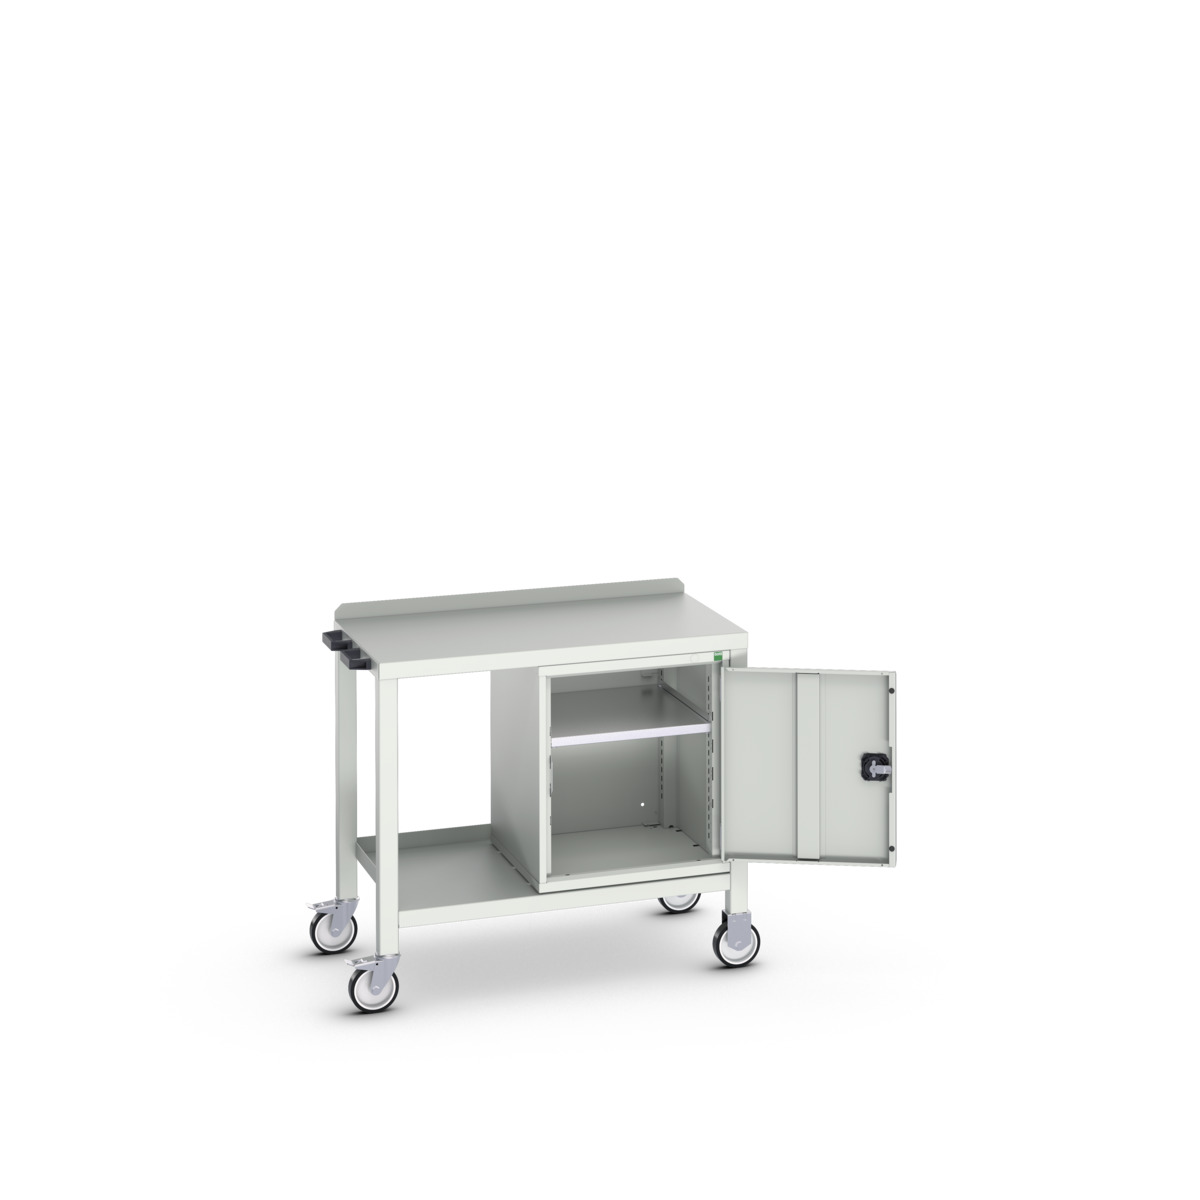 16922802.16 - verso mobile welded bench